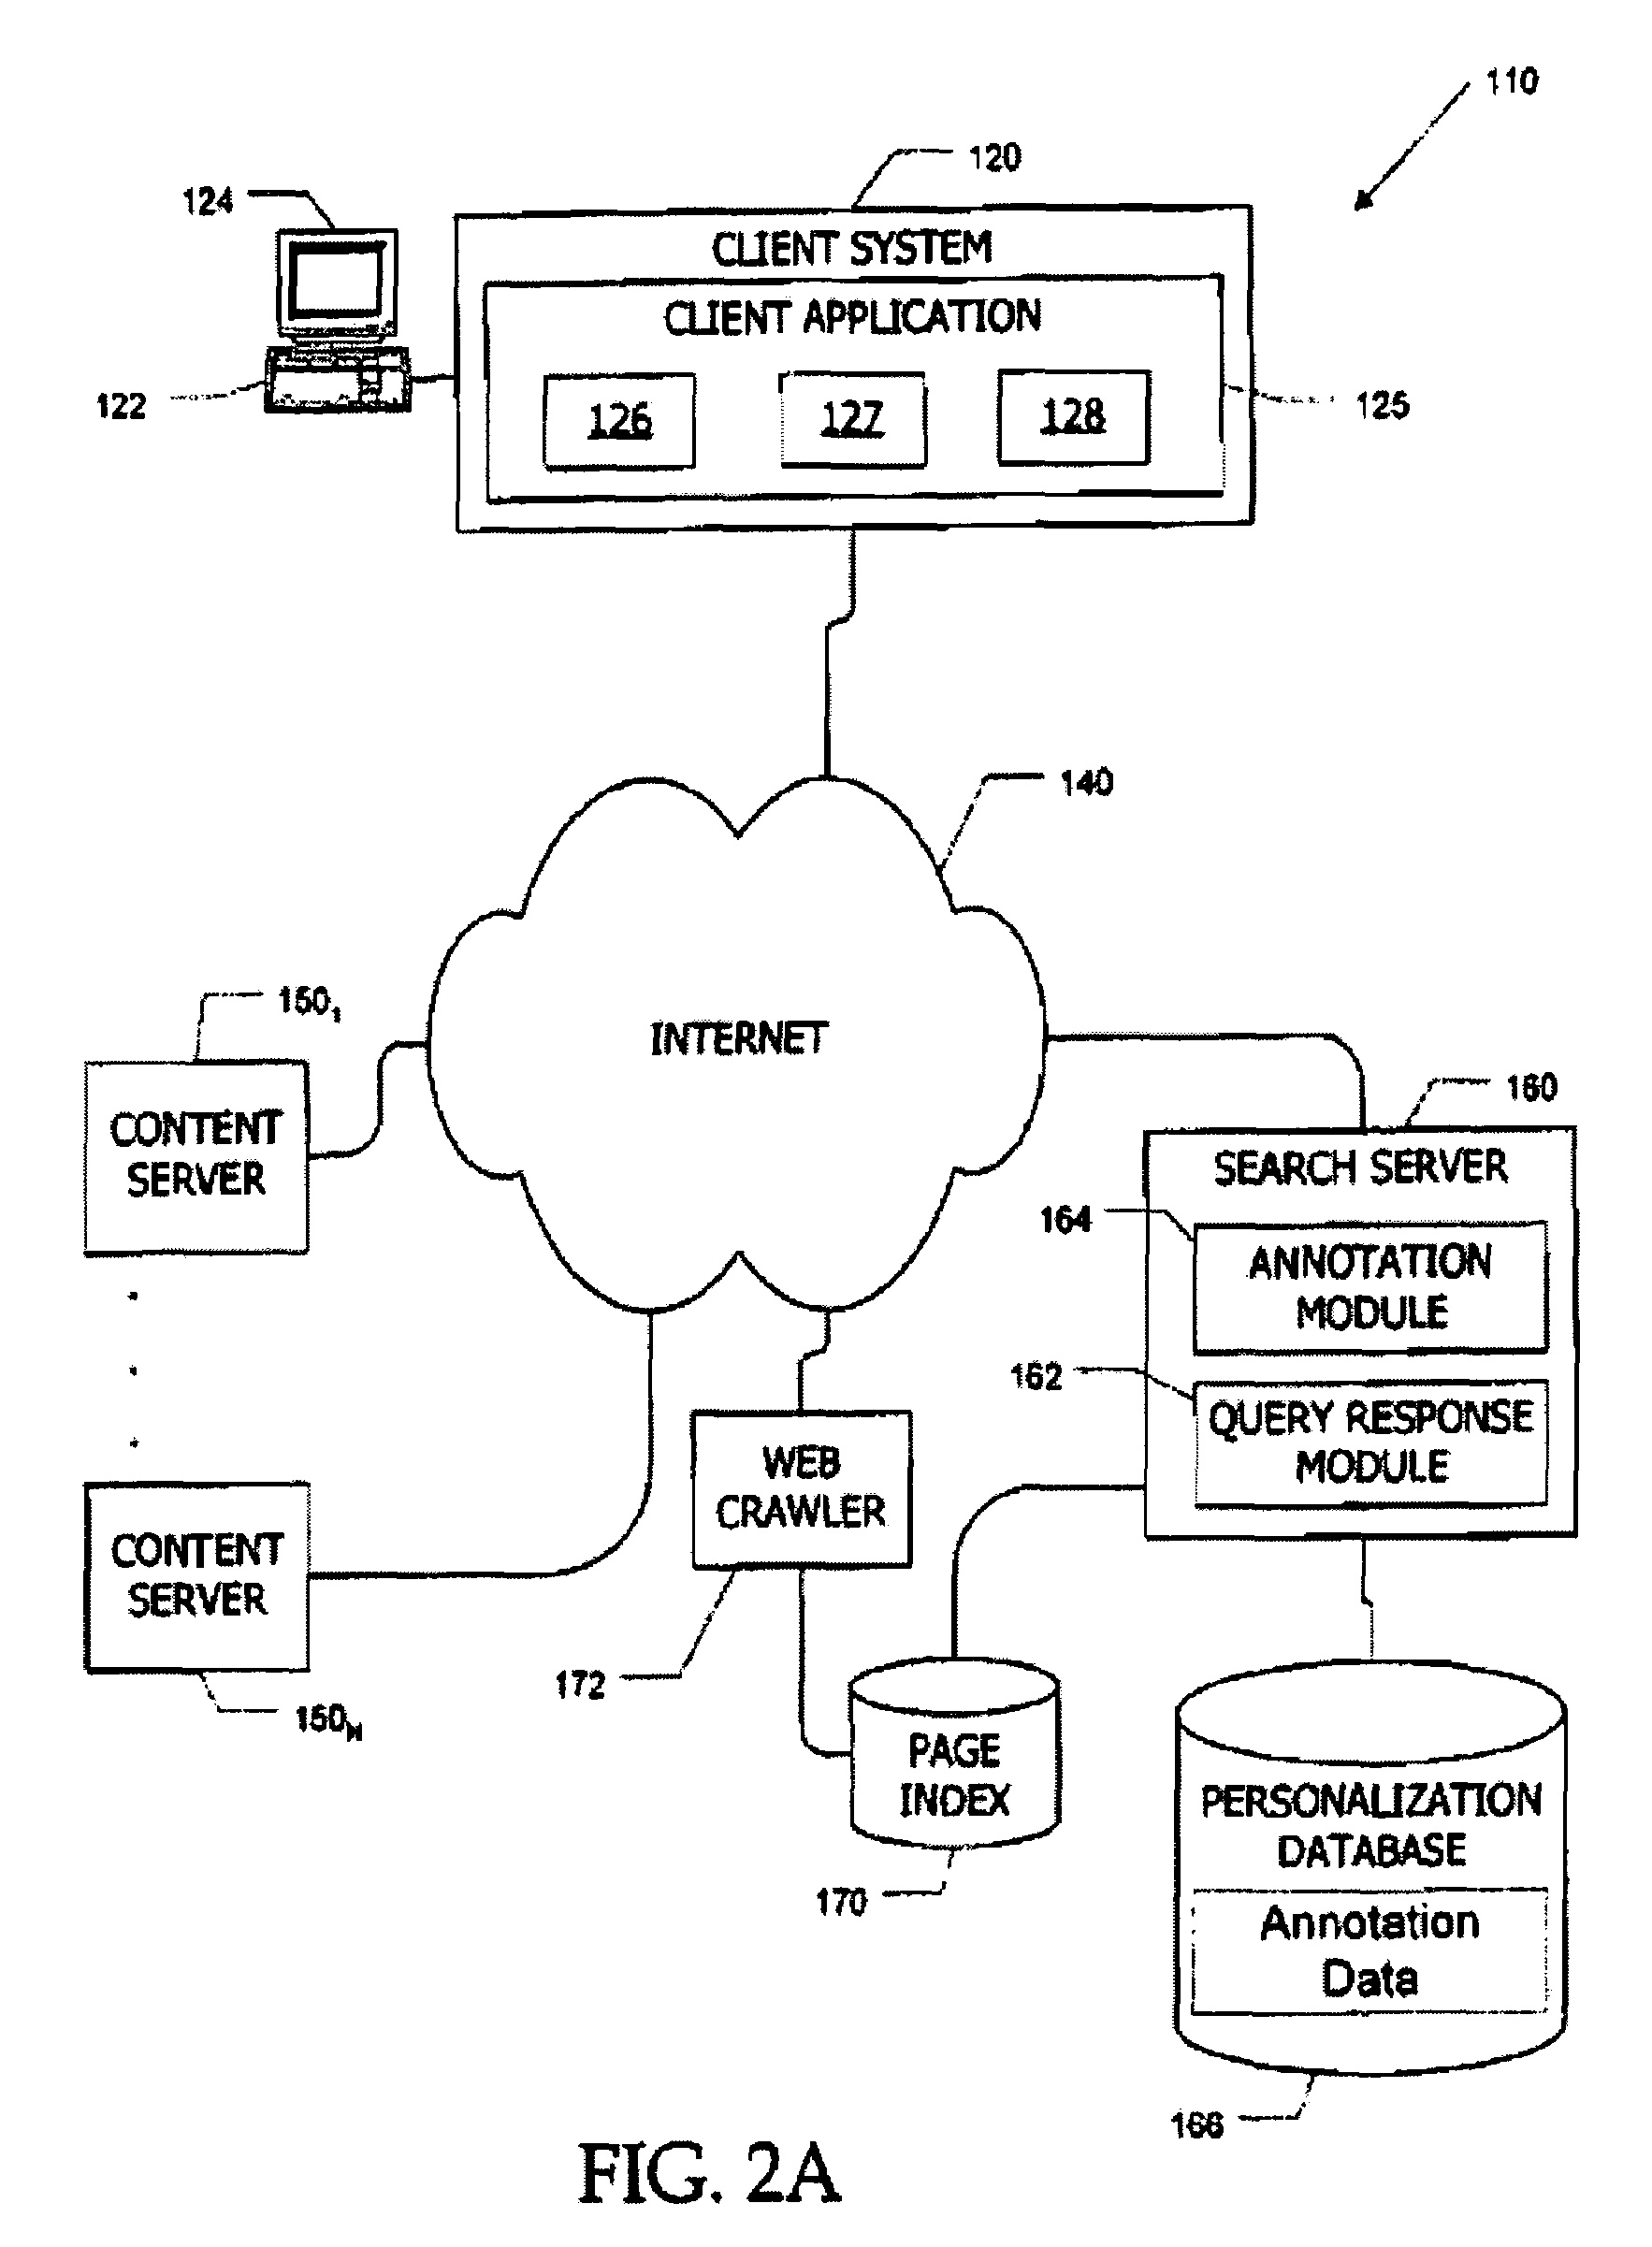 Apparatus and method for controlling content access based on shared annotations for annotated users in a folksonomy scheme